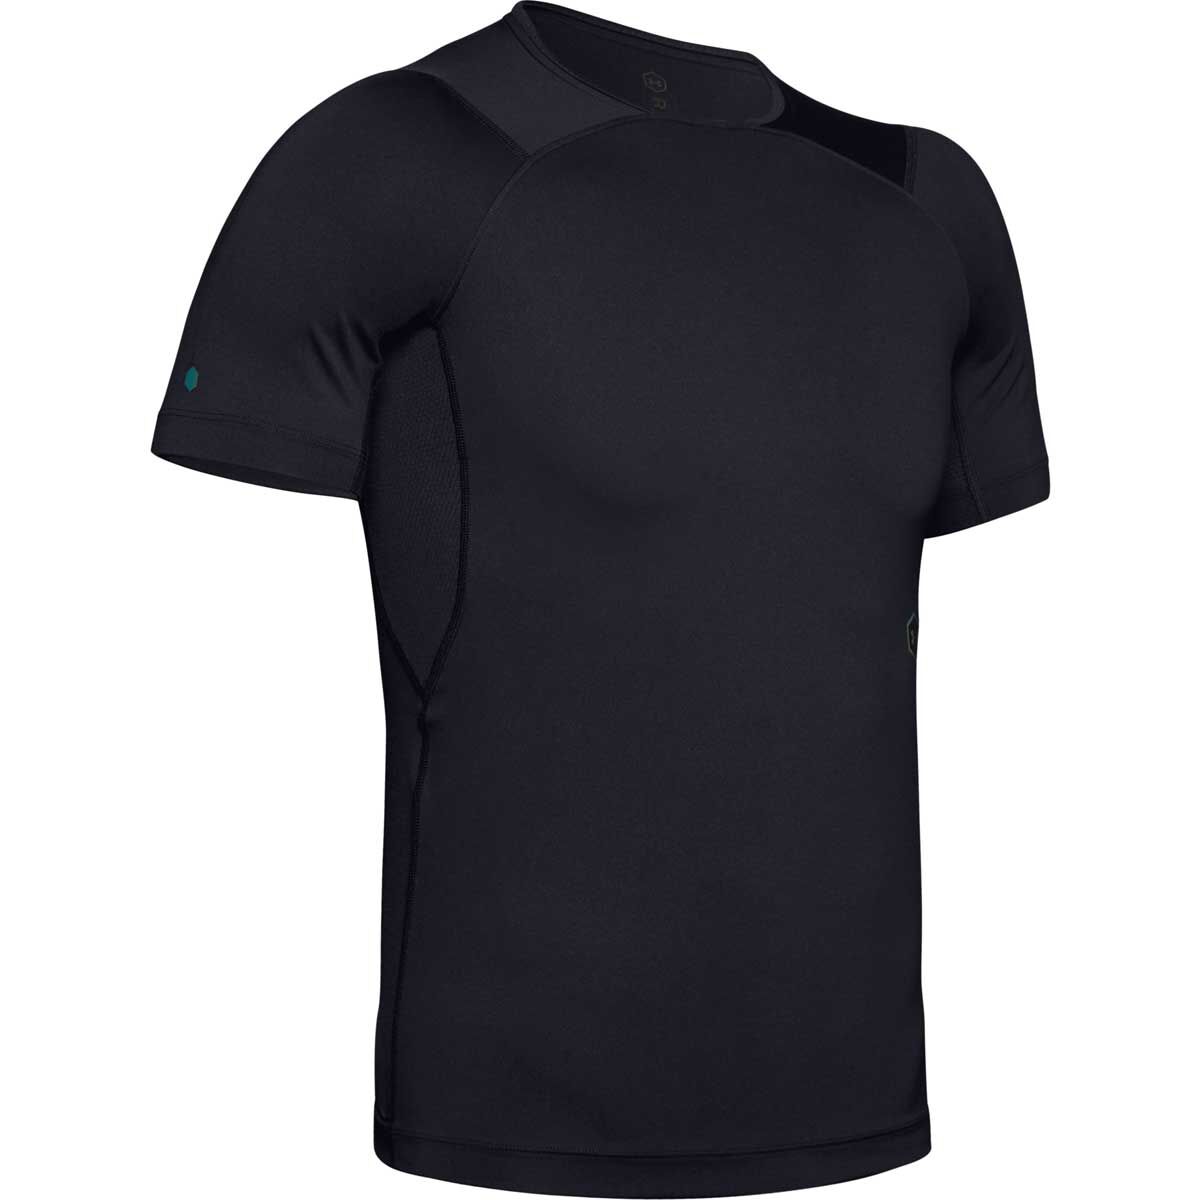 Compression T-shirt Under Armour RUSH™ Seamless - Compression